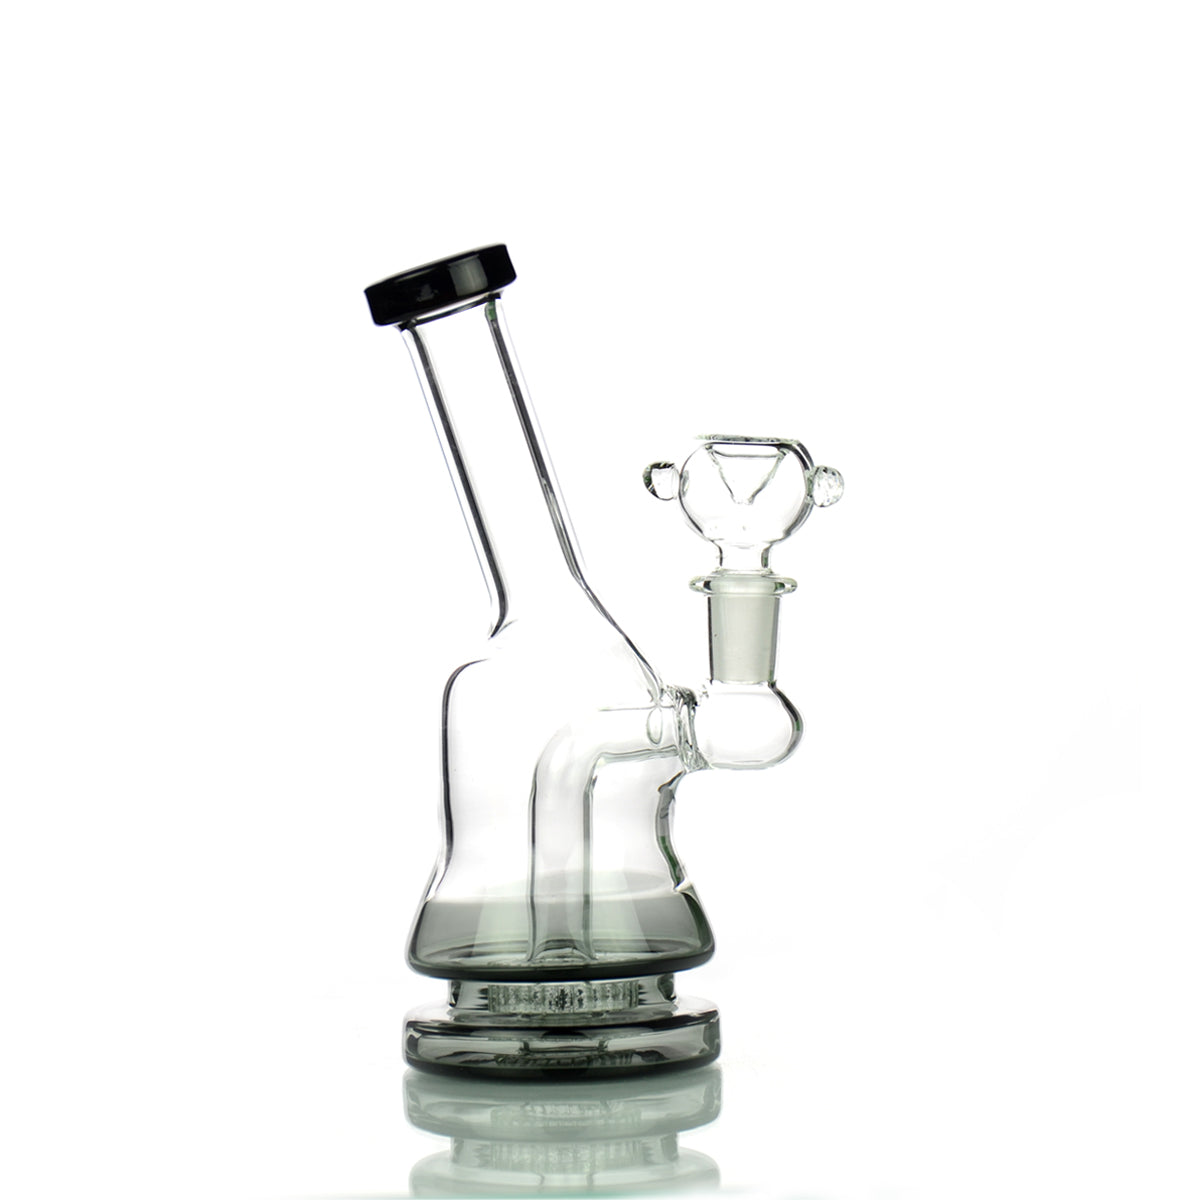 7'' Tilt Neck Water PIPE with Matrix Shower and 14mm Male Bowl